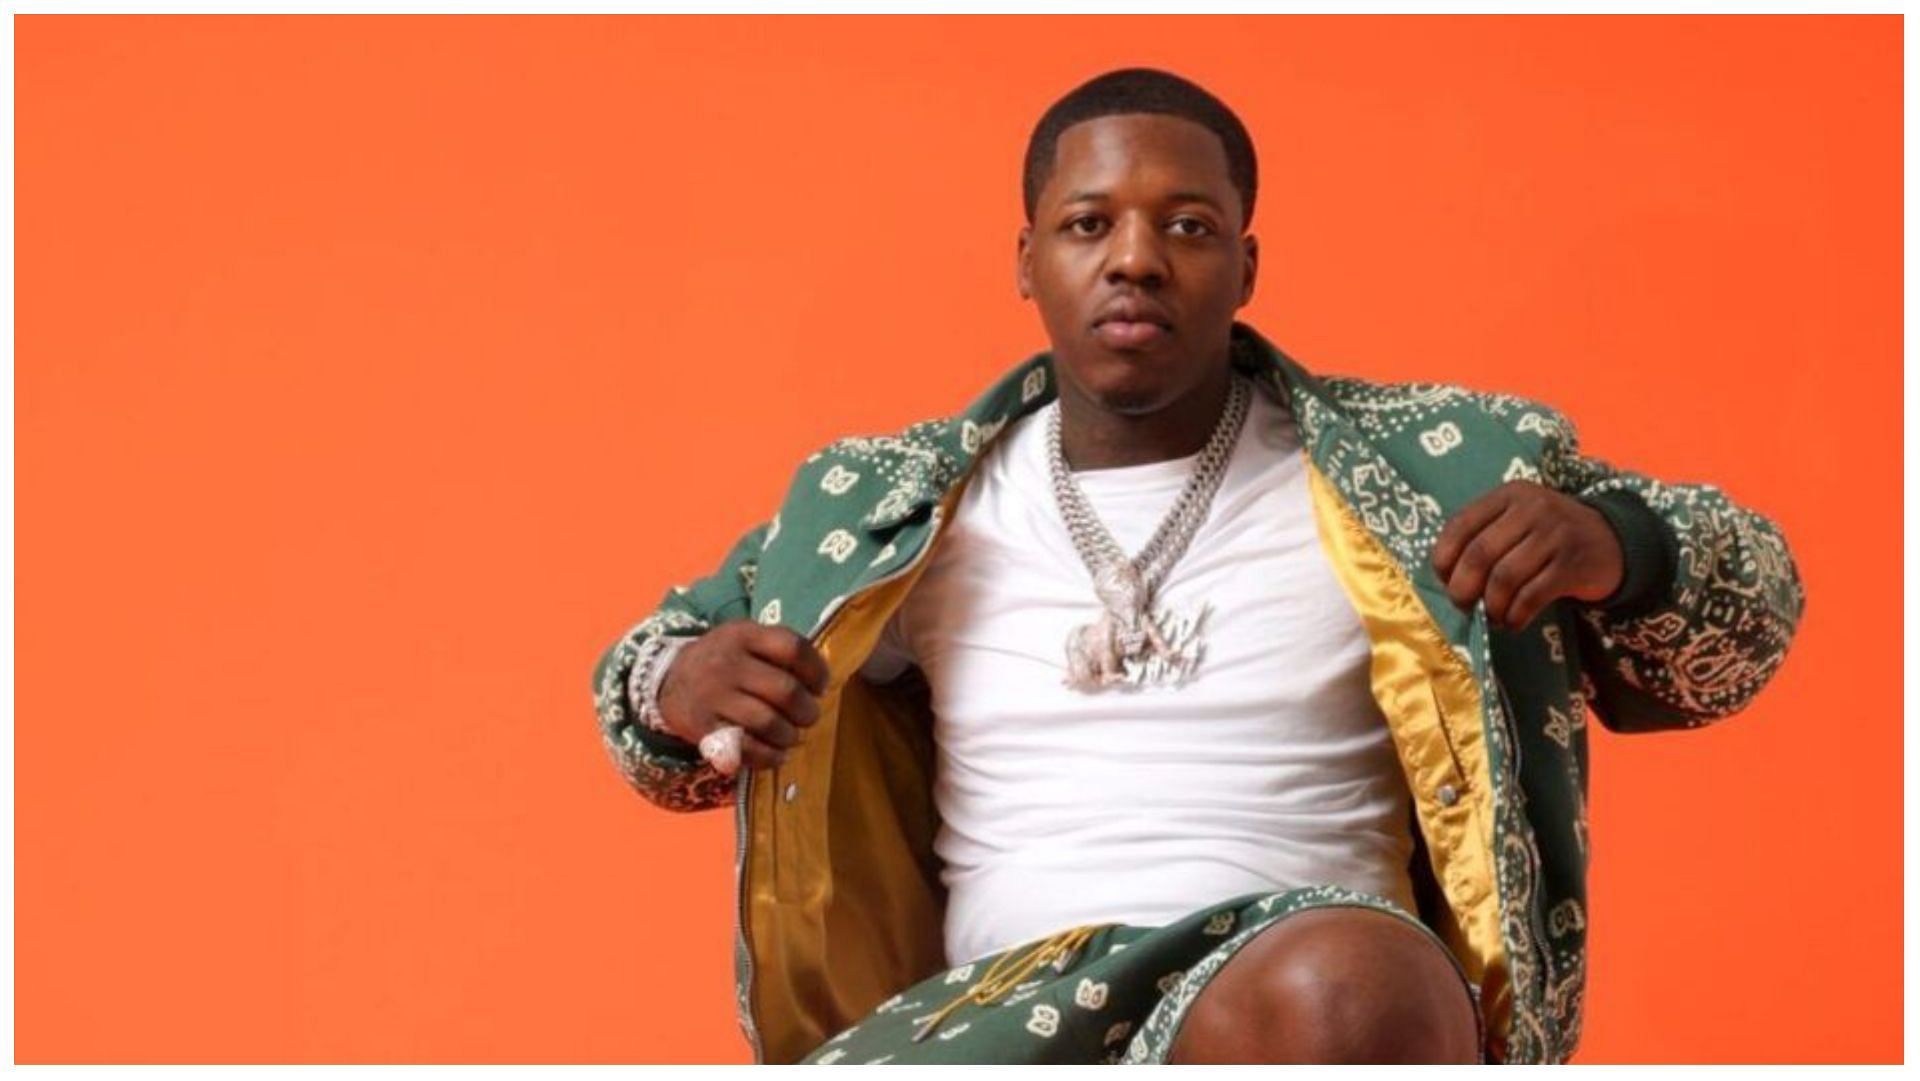 The rapper was shot arrested on weapons charges in 2015  (image via AllHipHop)